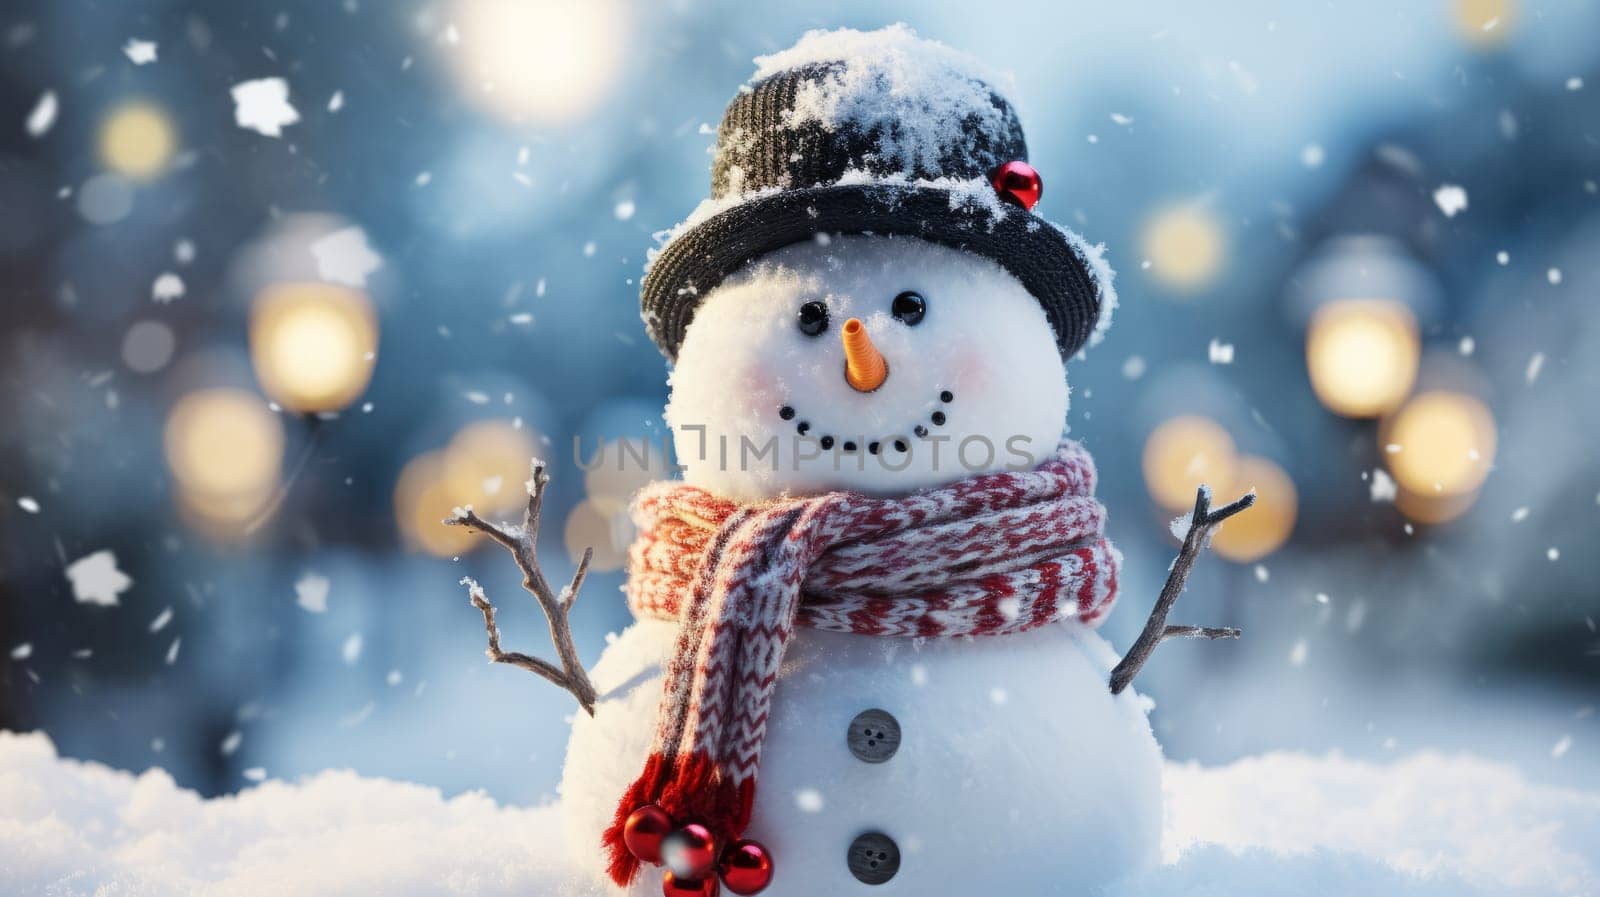 Cute snowman on a snowy street as a symbol of the winter holidays, AI by but_photo